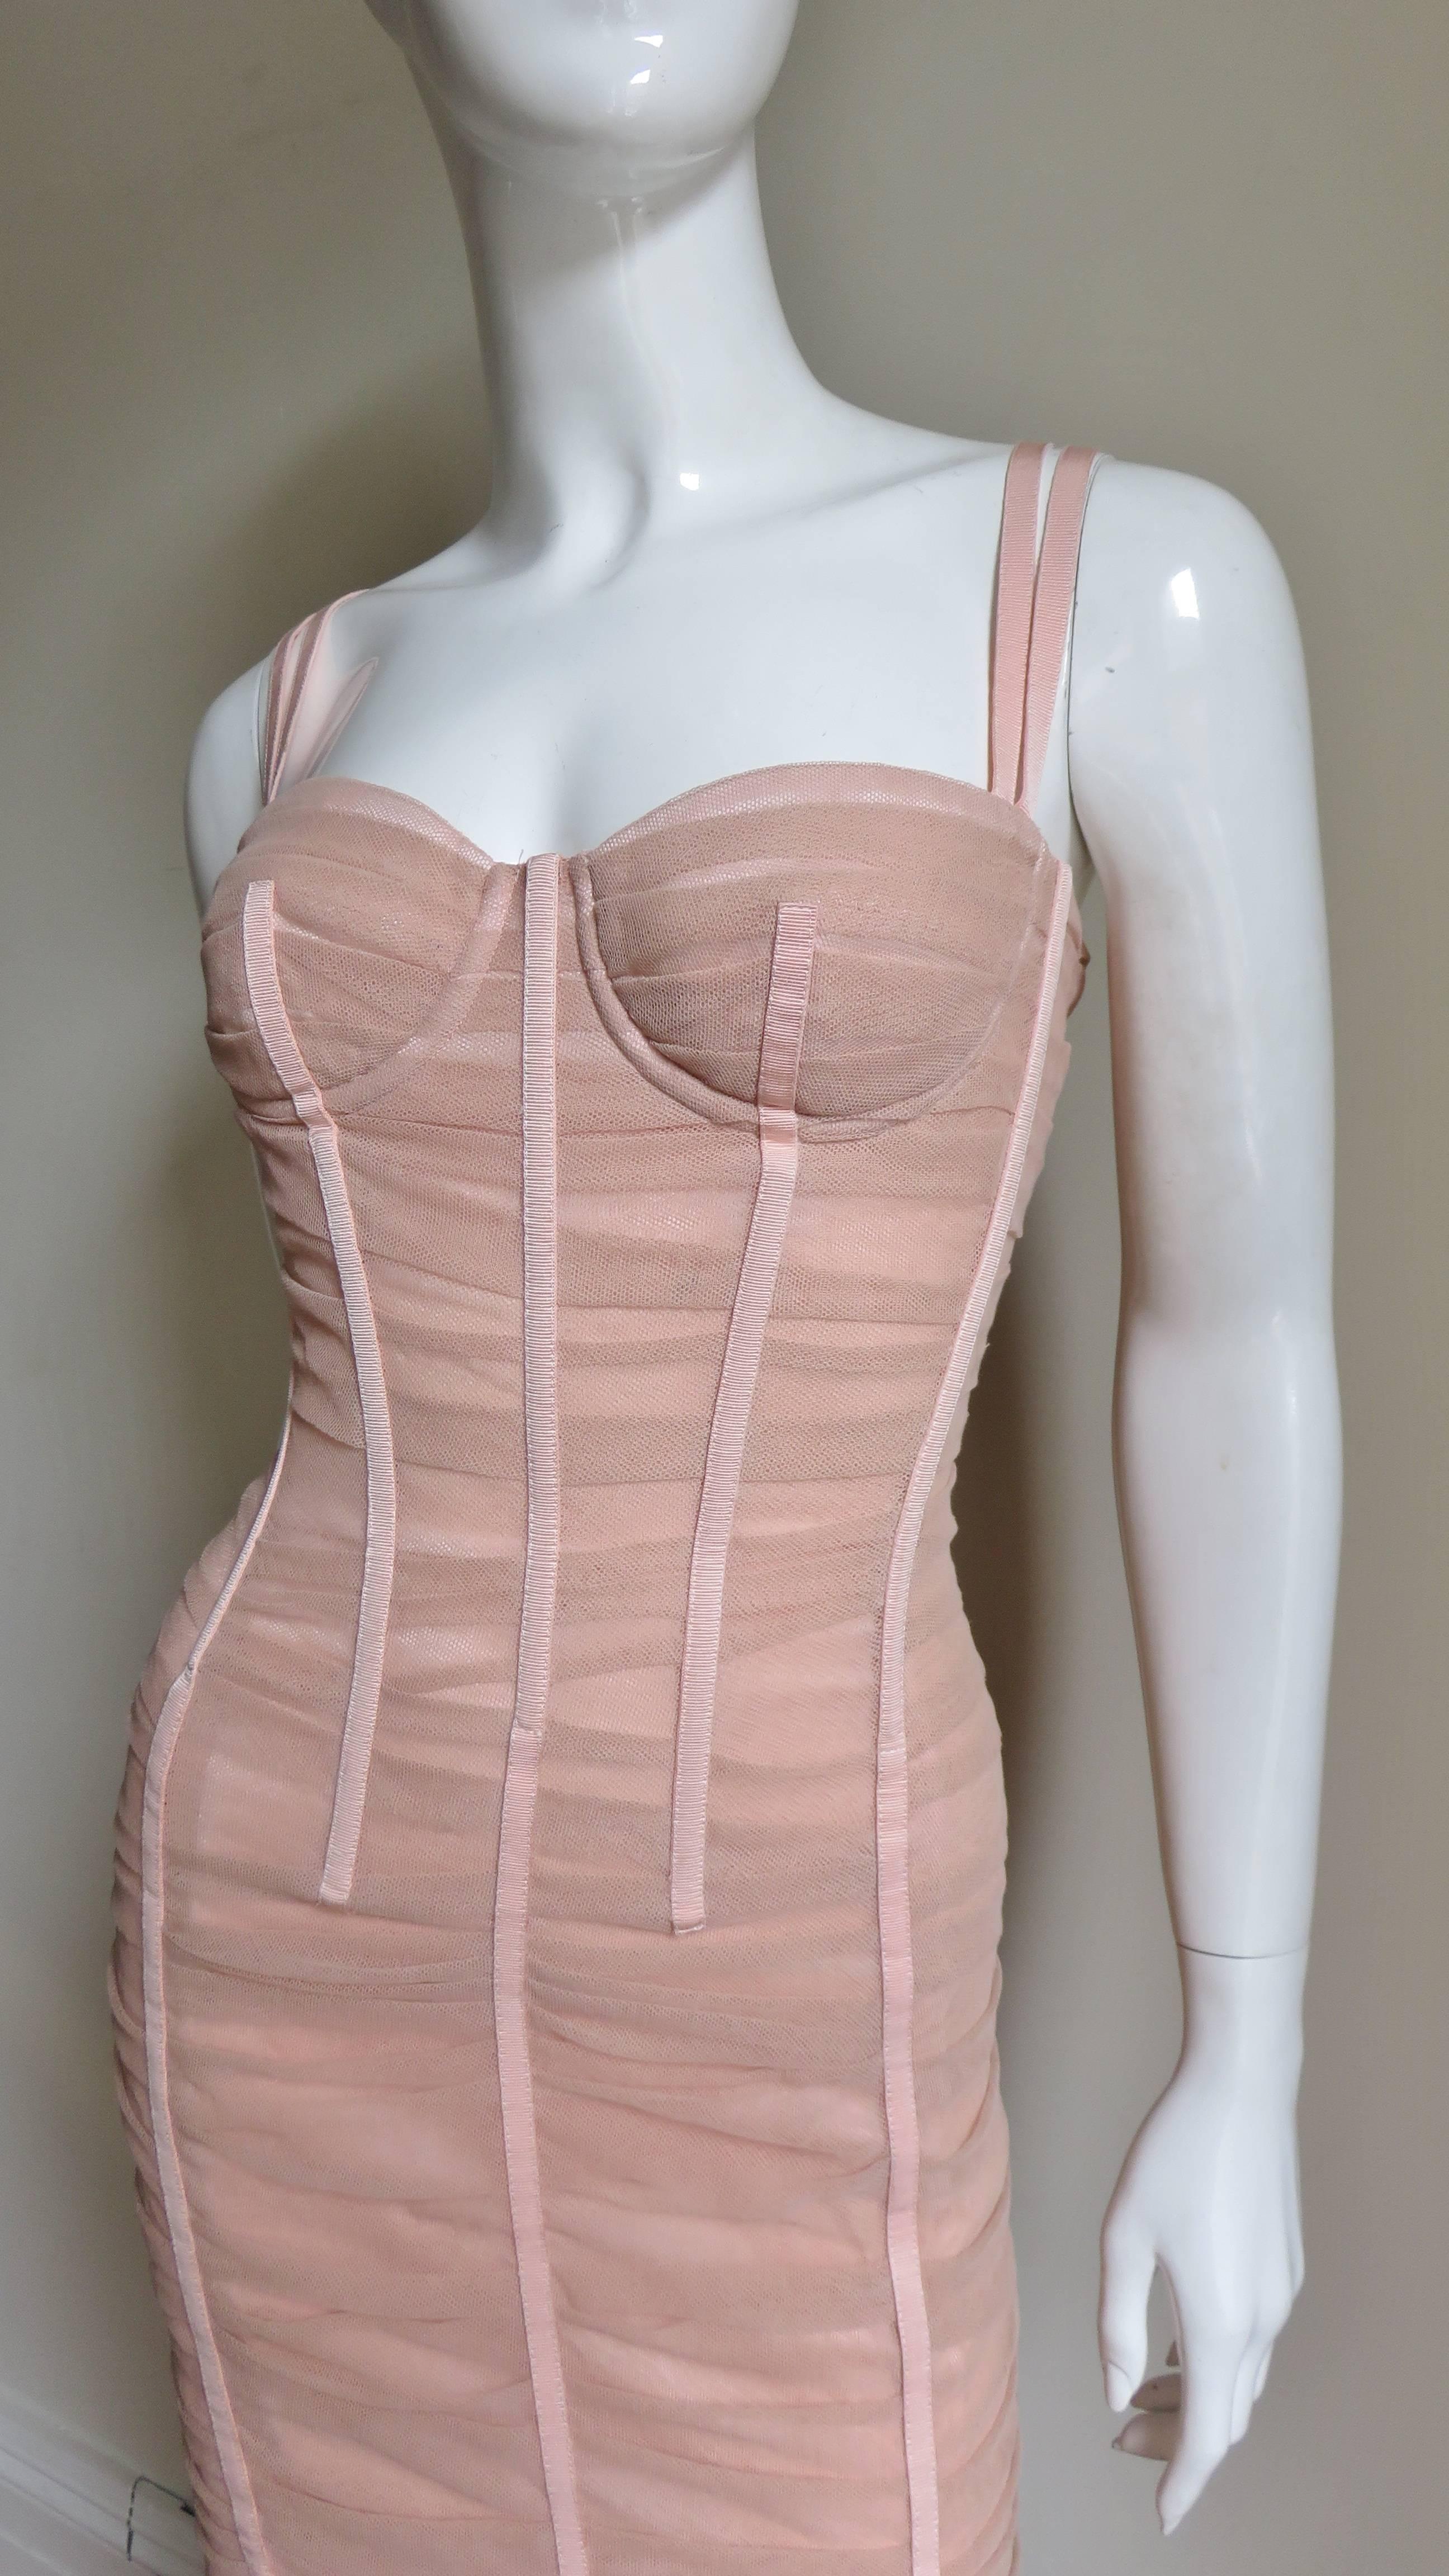 A fabulous pink silk dress from Dolce and Gabbana.  It has a bodice with bust cups and double straps which form a V in the back.  The bodice has boning which is incorporated into the design.  Between the fitted panels of the dress and the boning is